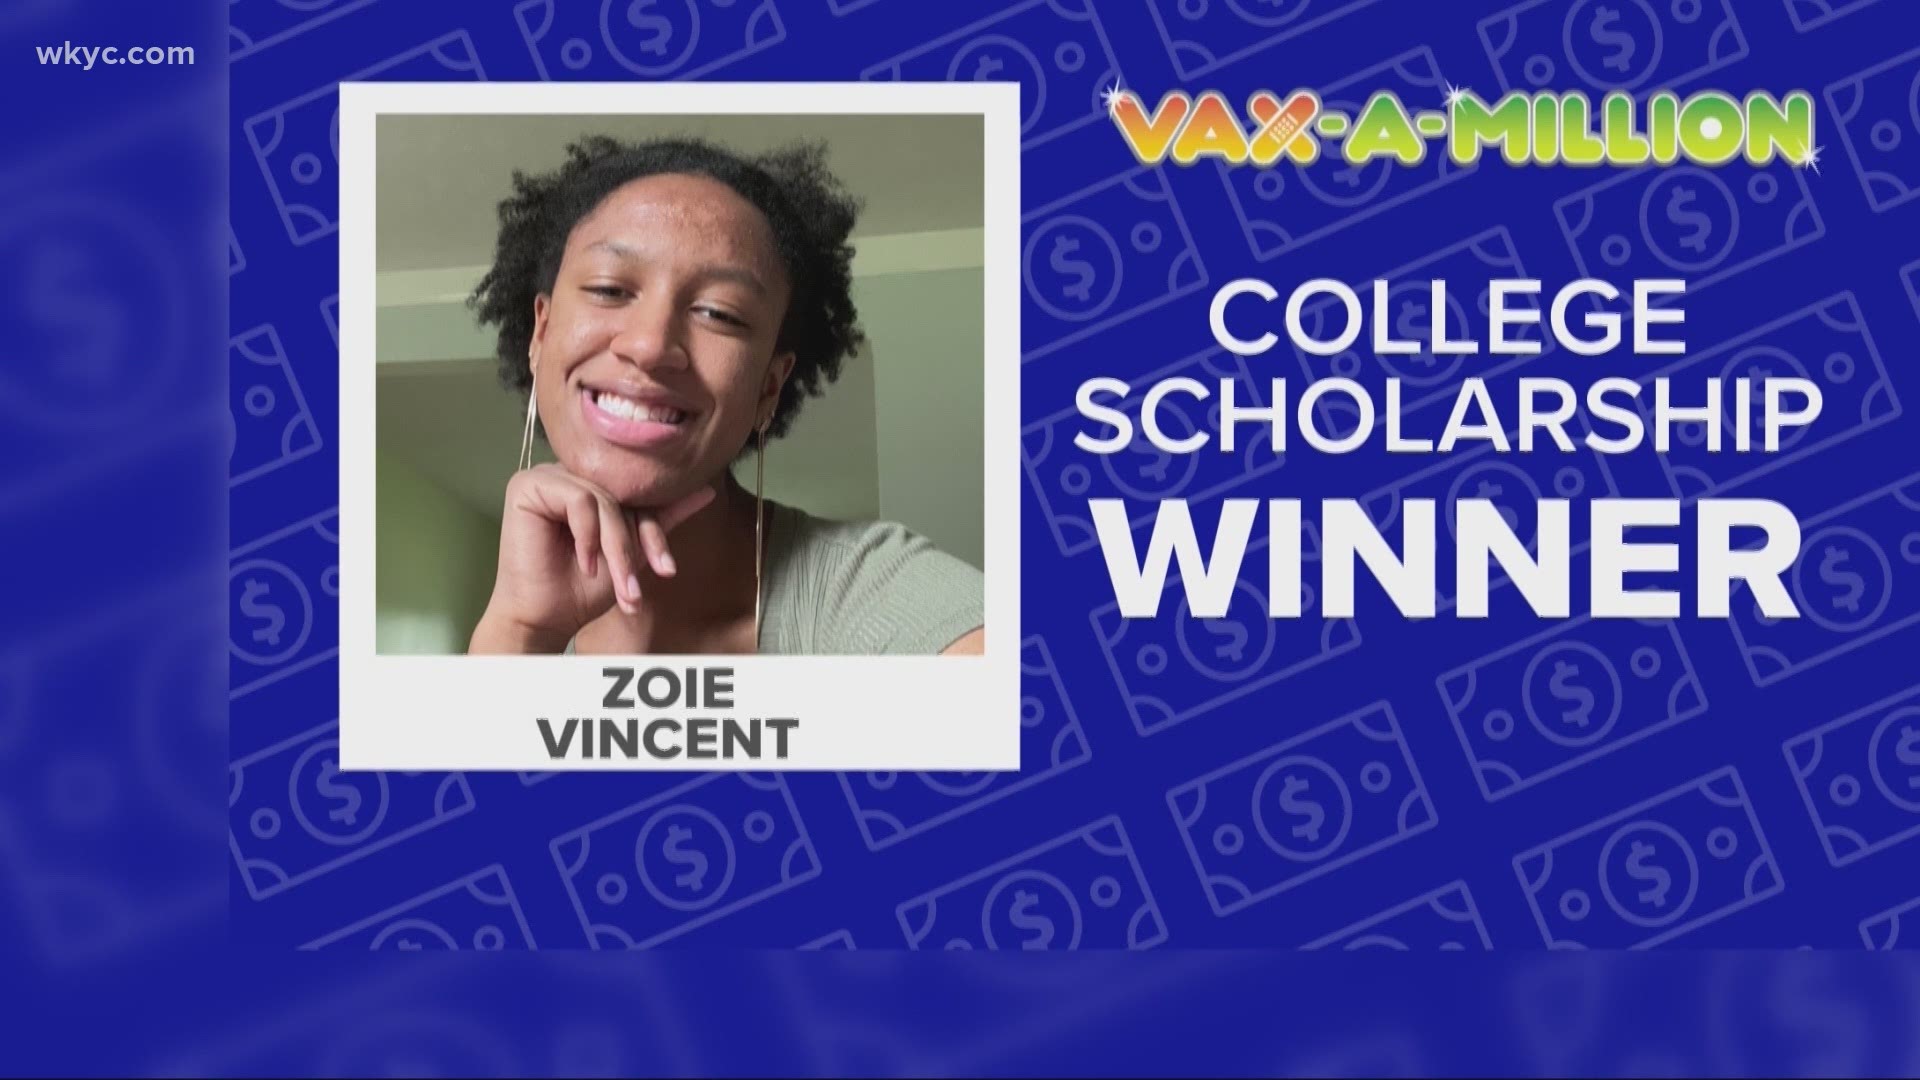 Here are Ohio's second Vax-a-Million winners. Jonathan Carlyle of Toledo was the $1 million winner. Zoie Vincent of Mayfield Village won a full-ride to college.